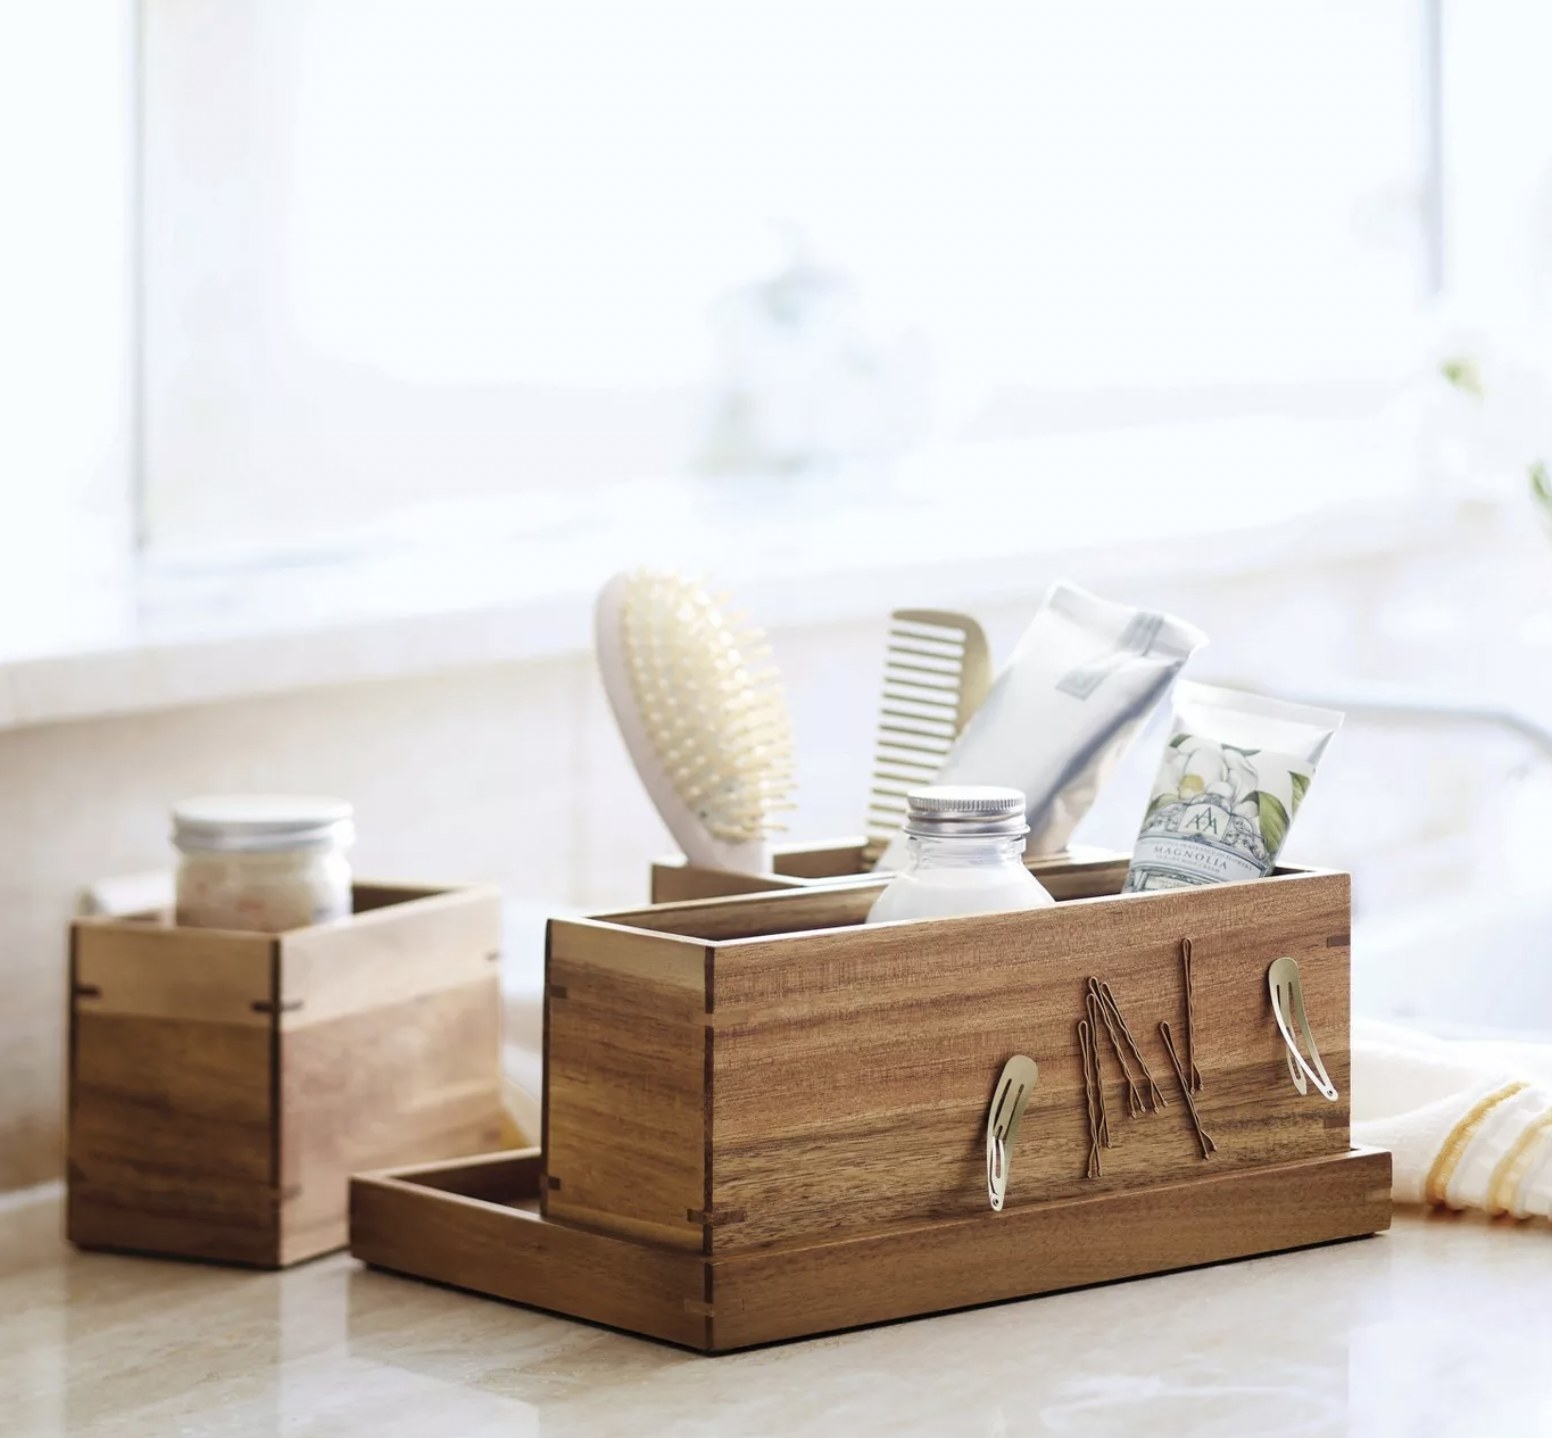 The wooden organizer with three separate sections filled with bathroom accessories and bobby pins and hair clips attached on the magnetic part of the wood